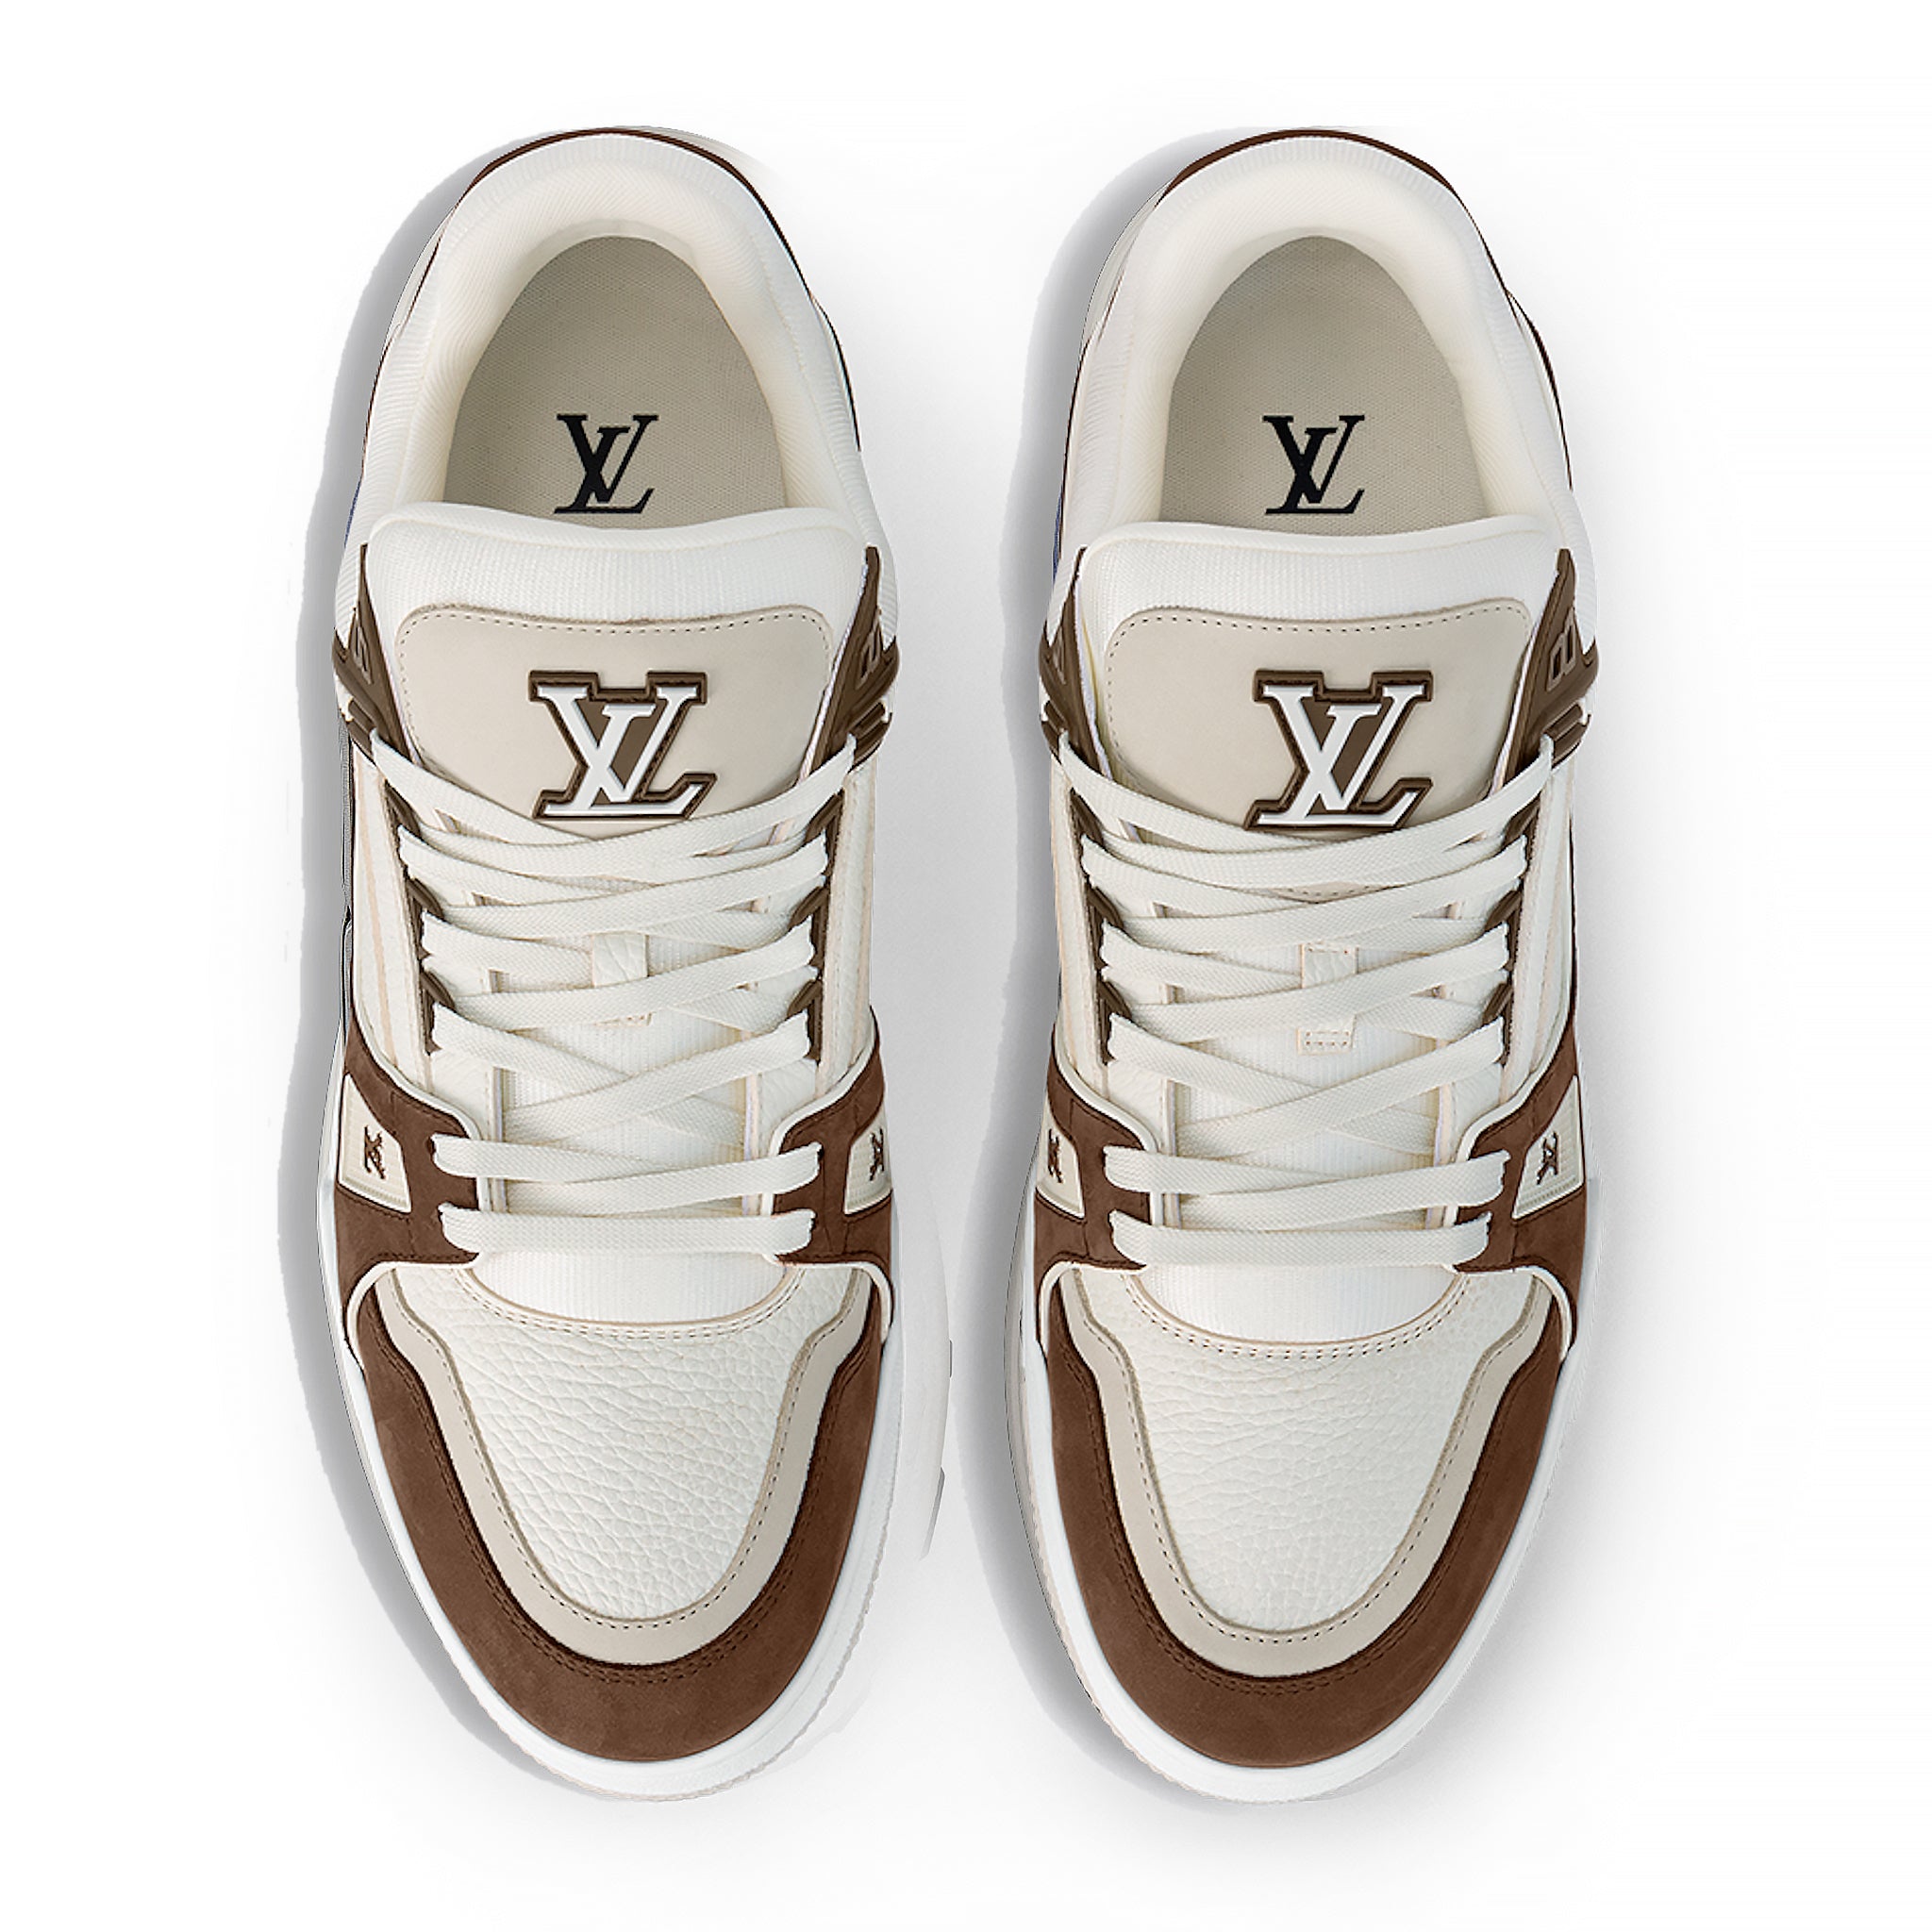 Top view of Louis Vuitton LV Trainer Calf Leather Moka Sneaker NVPROD4280067V